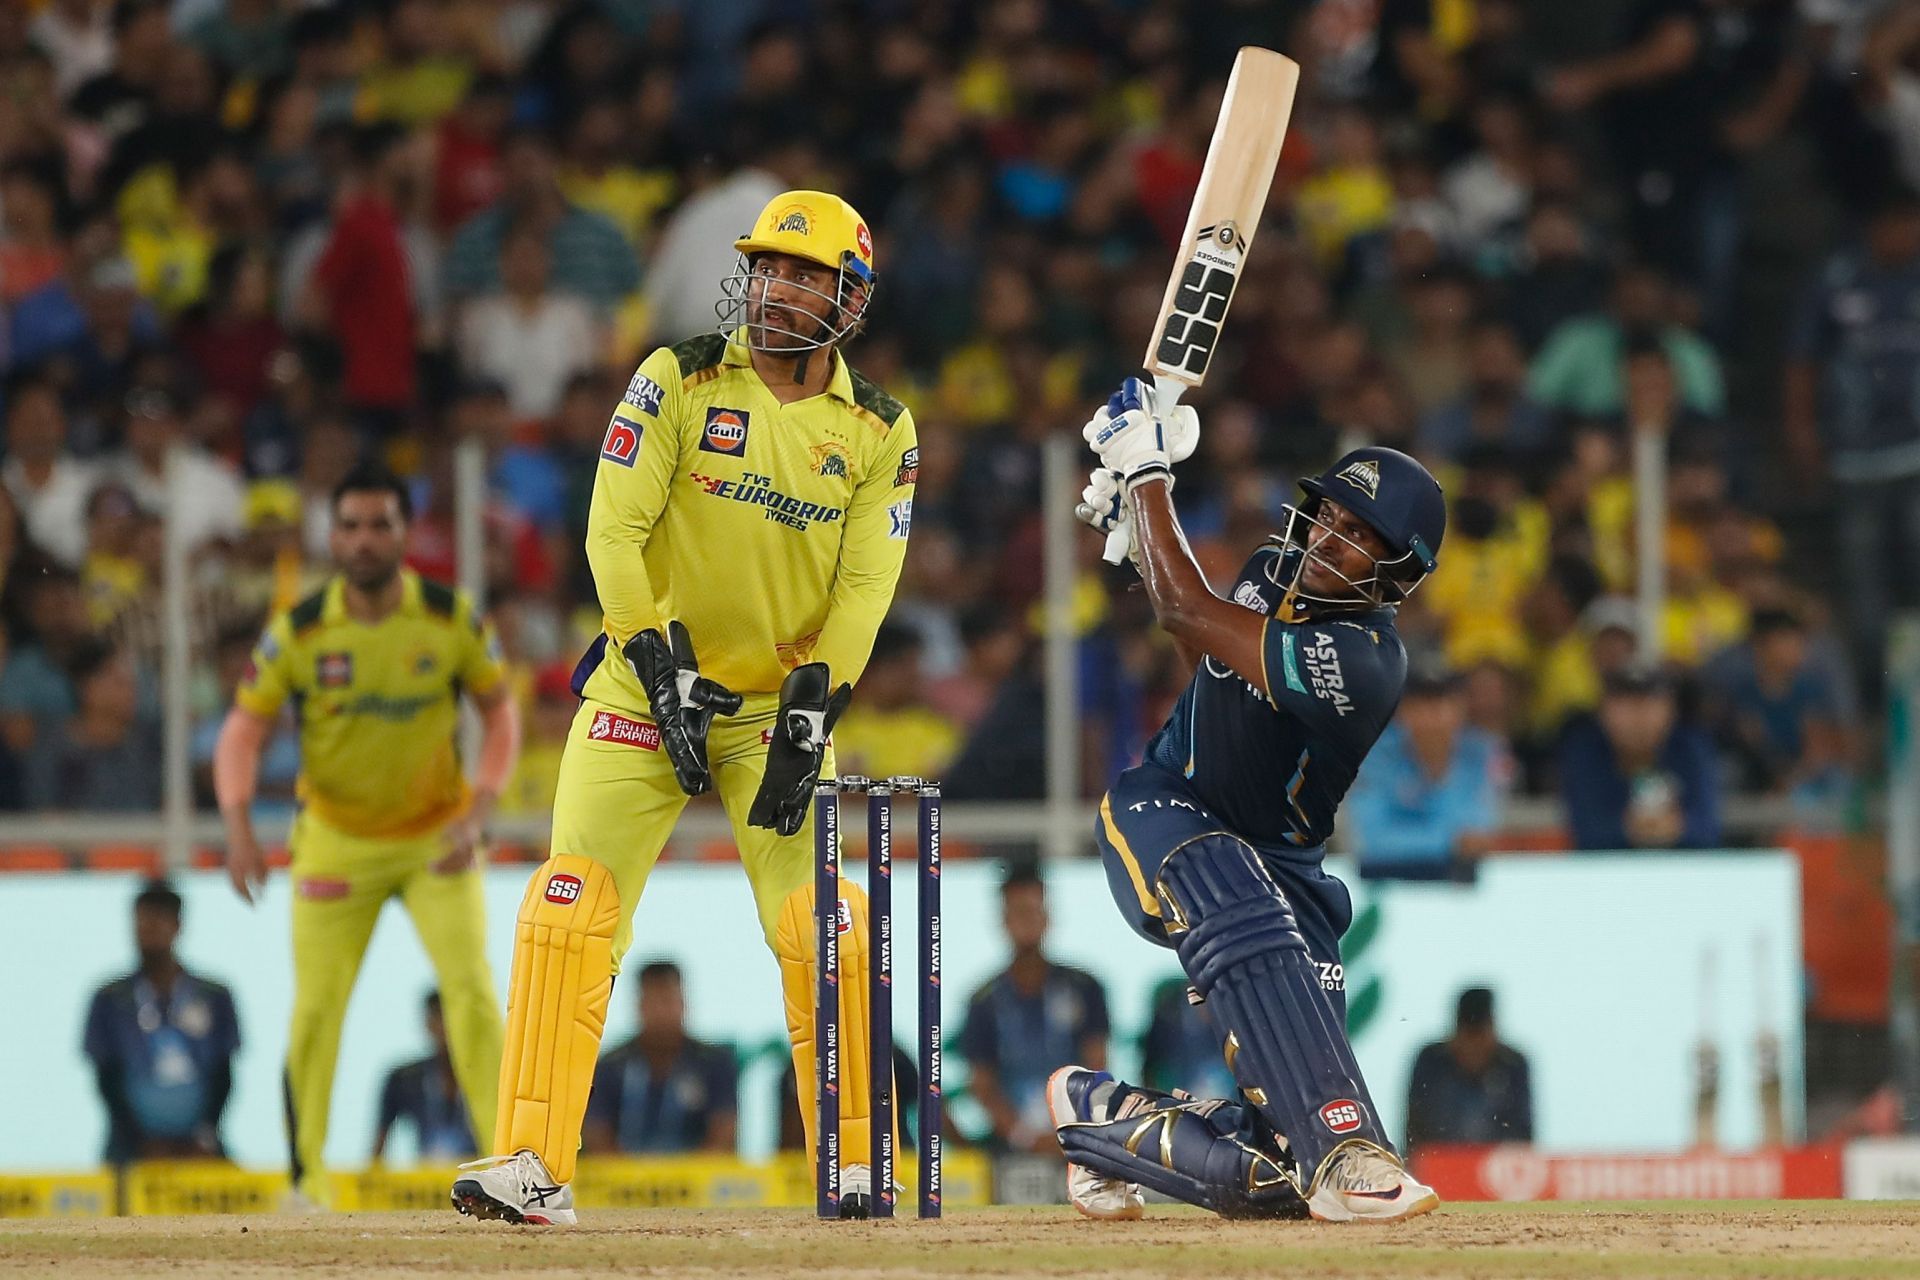 Sai Sudharsan played a superb knock for GT in the IPL 2023 final.